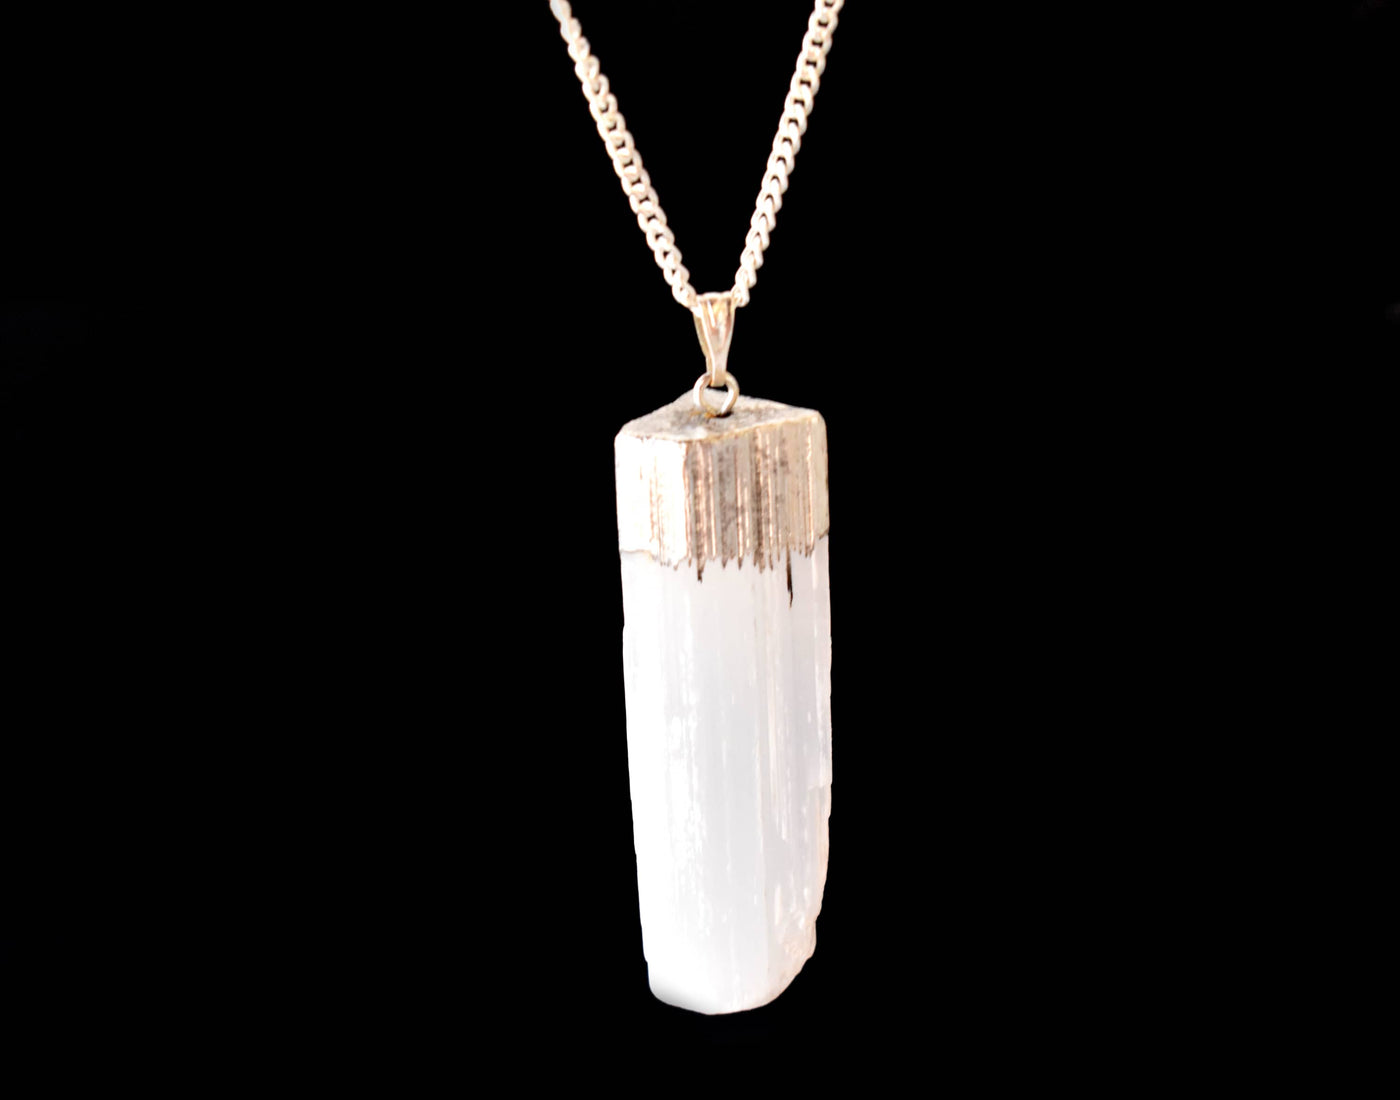 Selenite Rough Stone Pendants, Natural Electroplated Silver Crystals with Chain